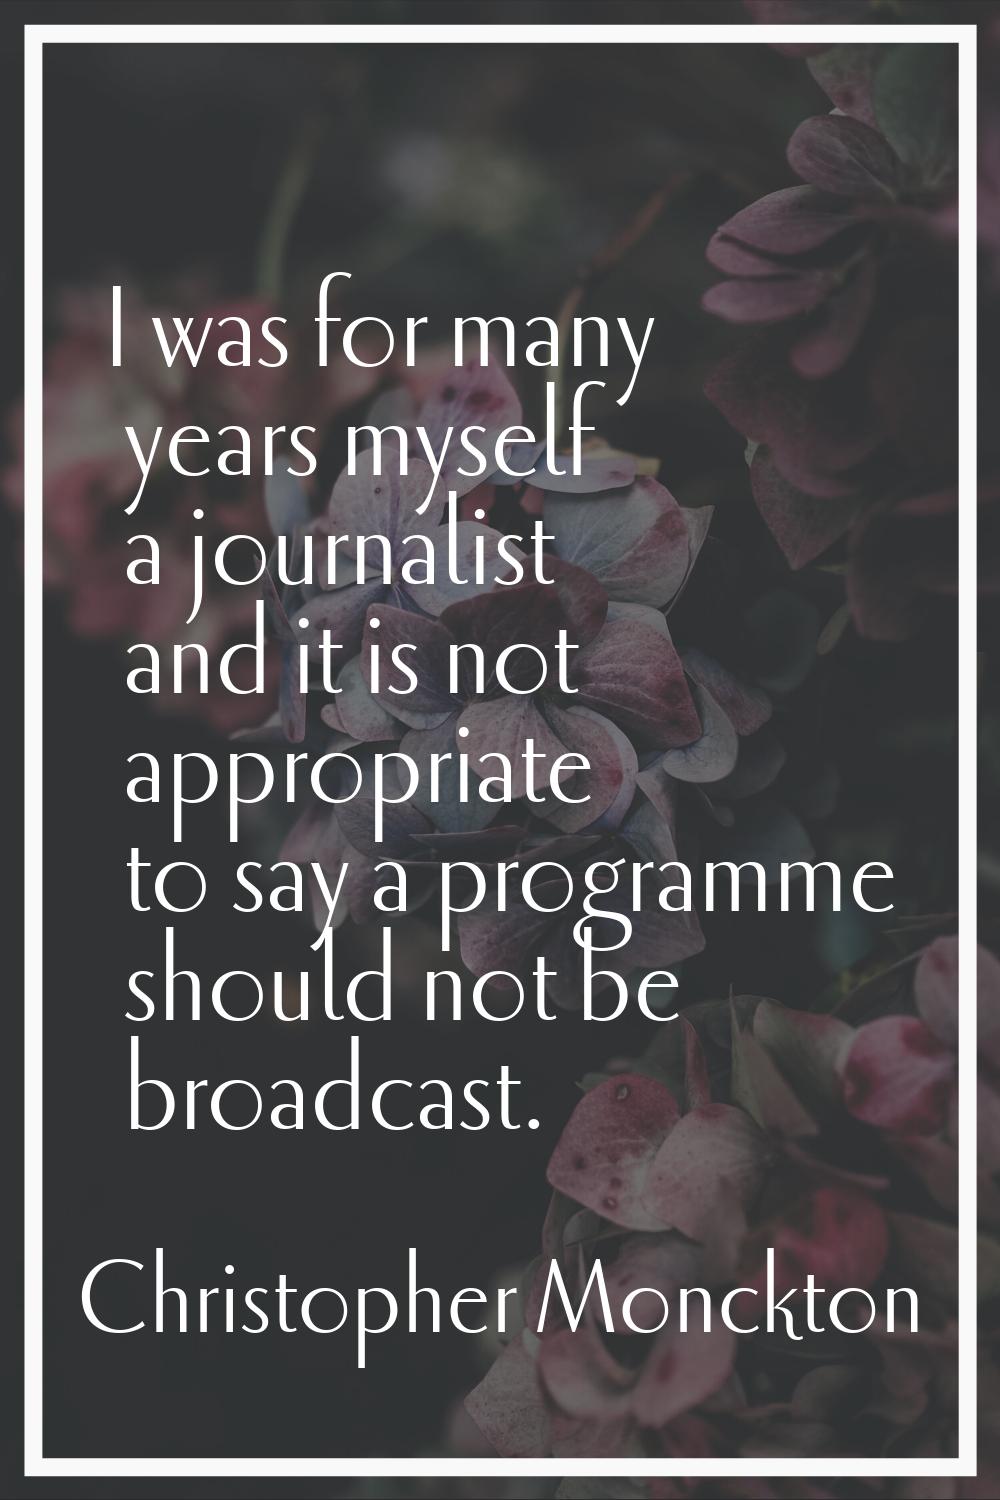 I was for many years myself a journalist and it is not appropriate to say a programme should not be